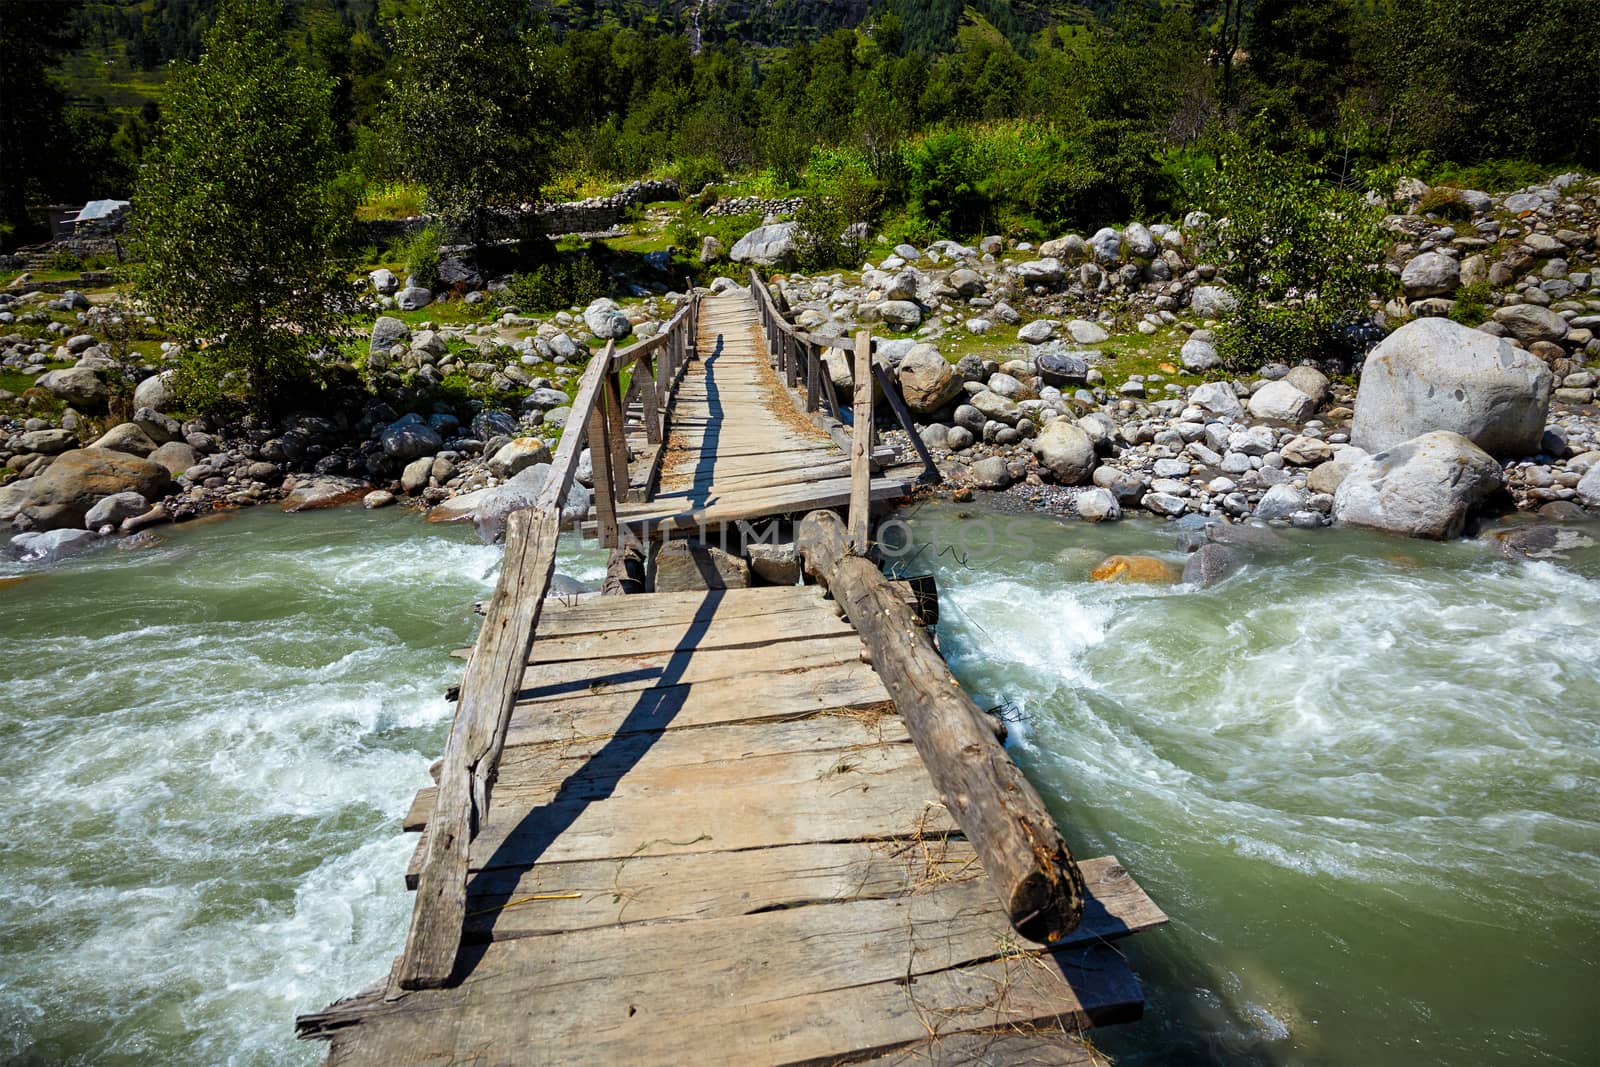 Bridge over river in Himalayas by dimol